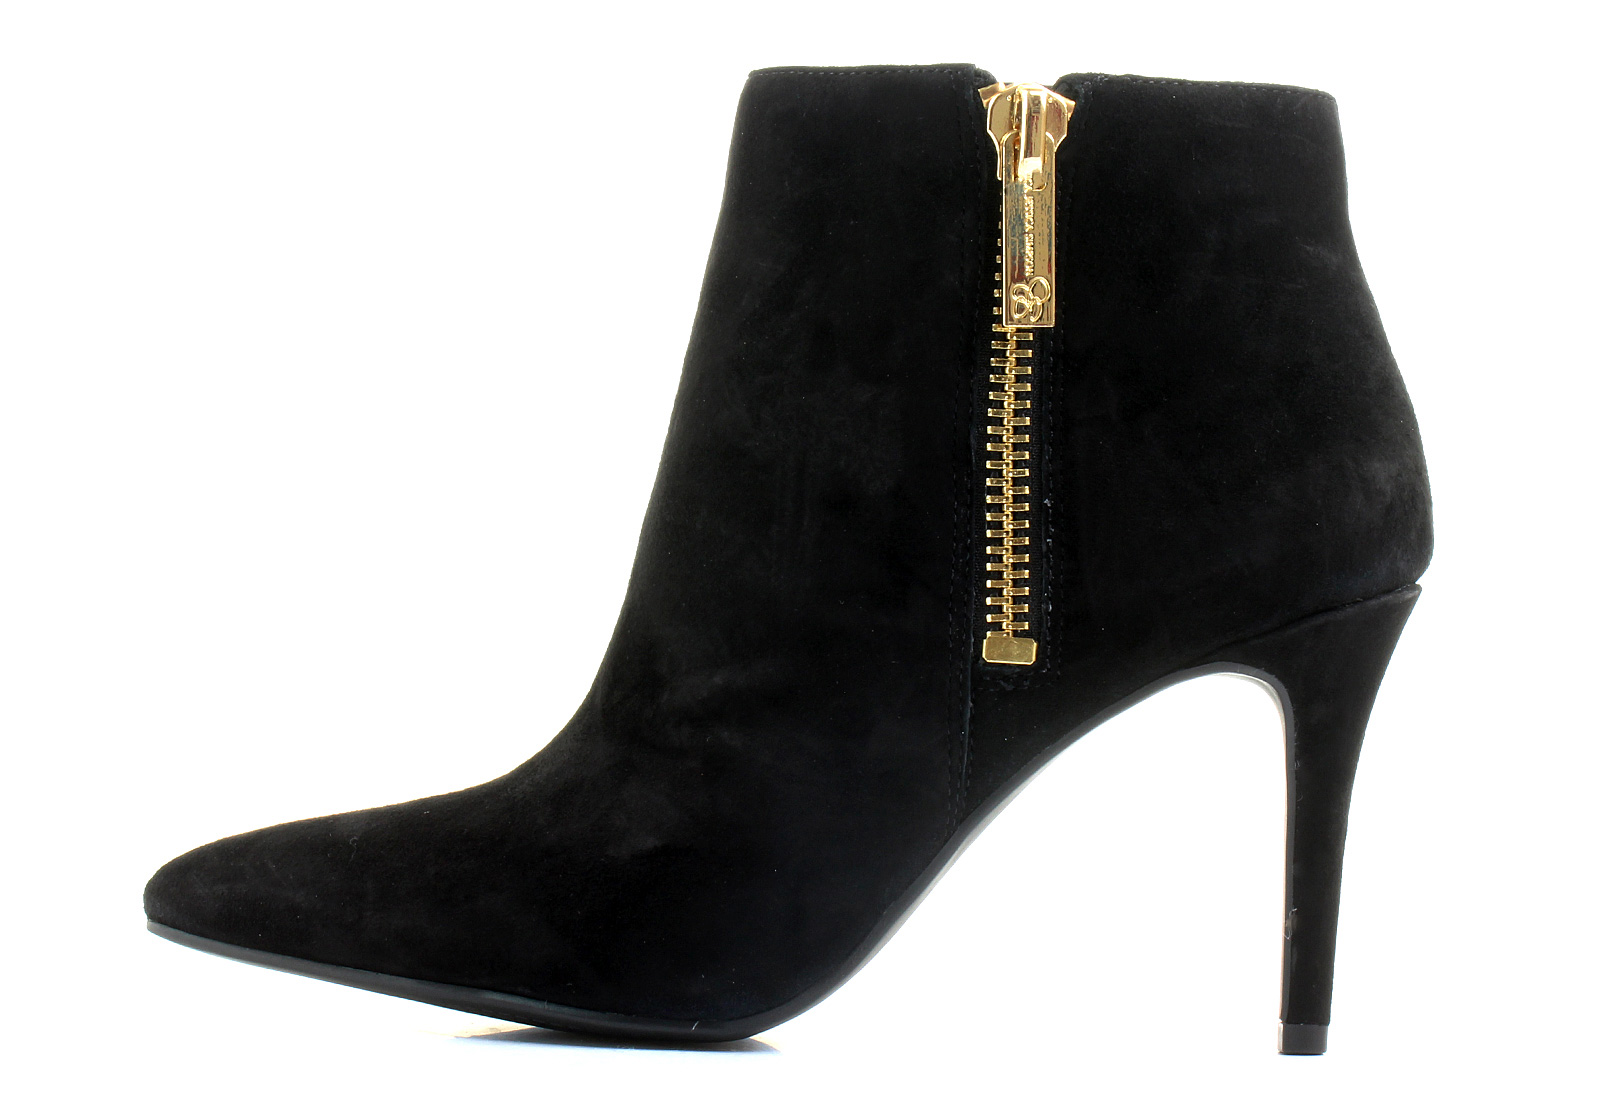 Jessica Simpson Boots - Lafay - lafay-blk - Online shop for sneakers, shoes and boots1600 x 1100